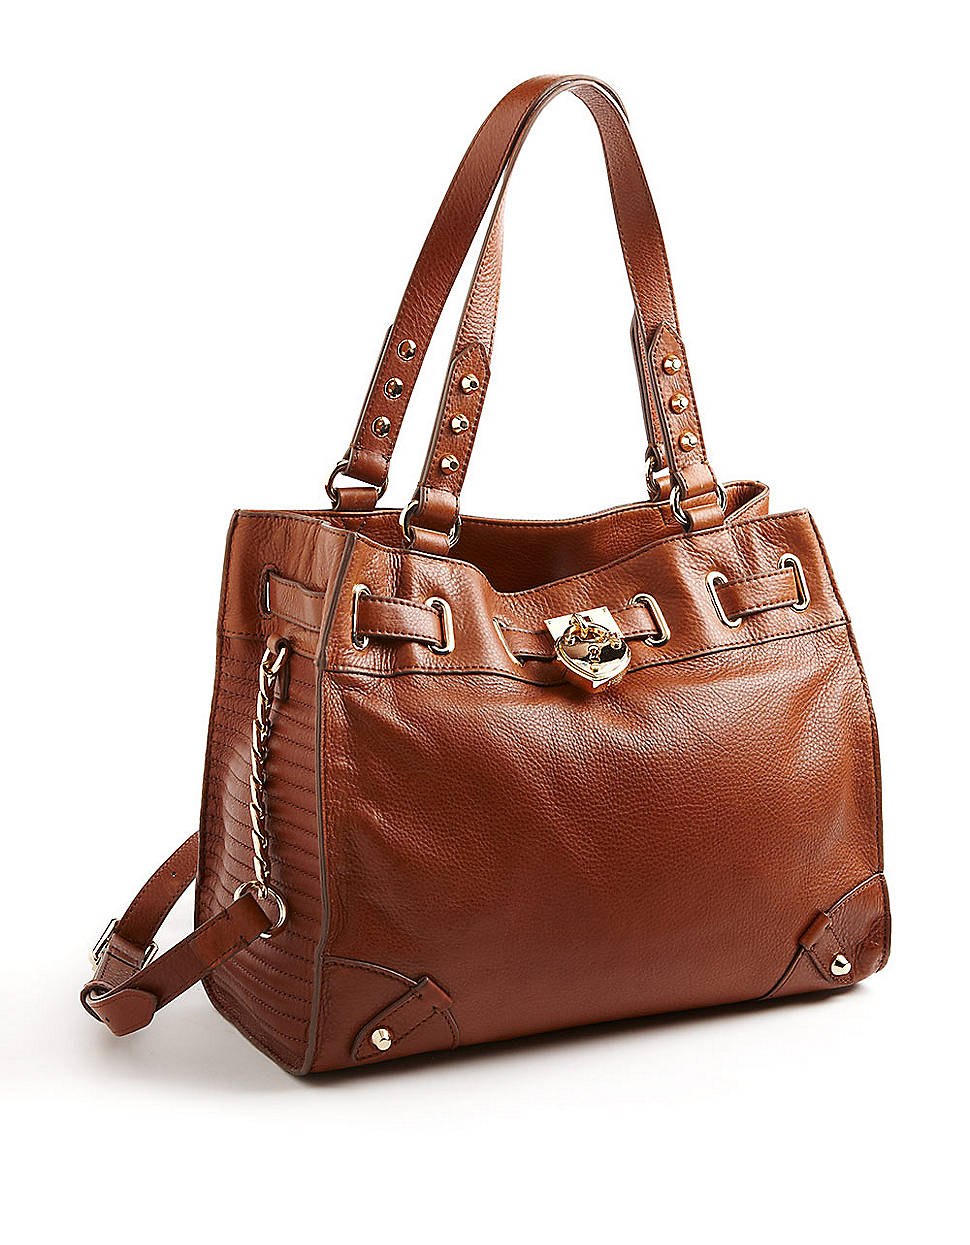 Juicy Couture Daydreamer Leather Crossbody Tote Bag in Brown (cognac)